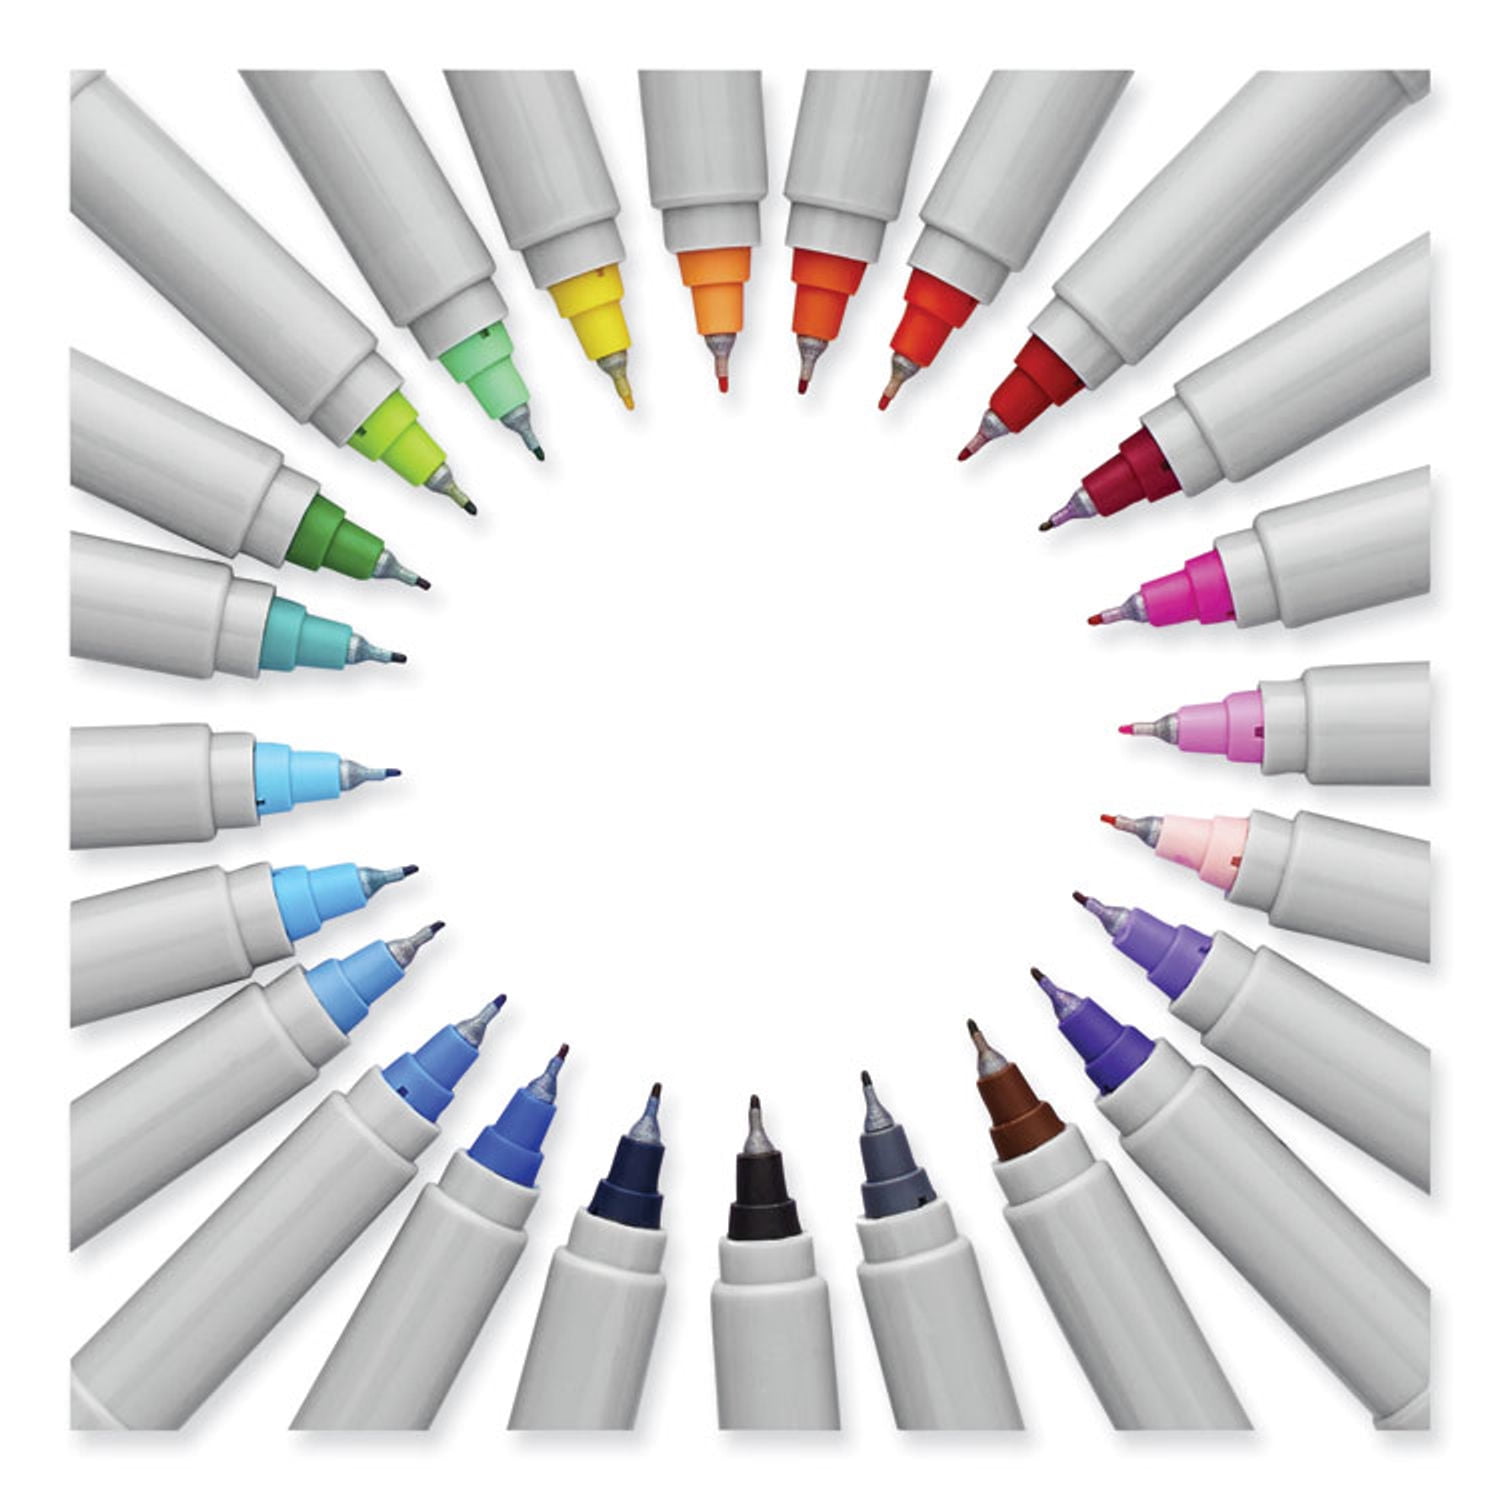 Sharpie Ultra Fine Tip Permanent Marker, Extra-Fine Needle Tip, Assorted  Color Burst & Classic Colors, 24/Pack - BuyDirect